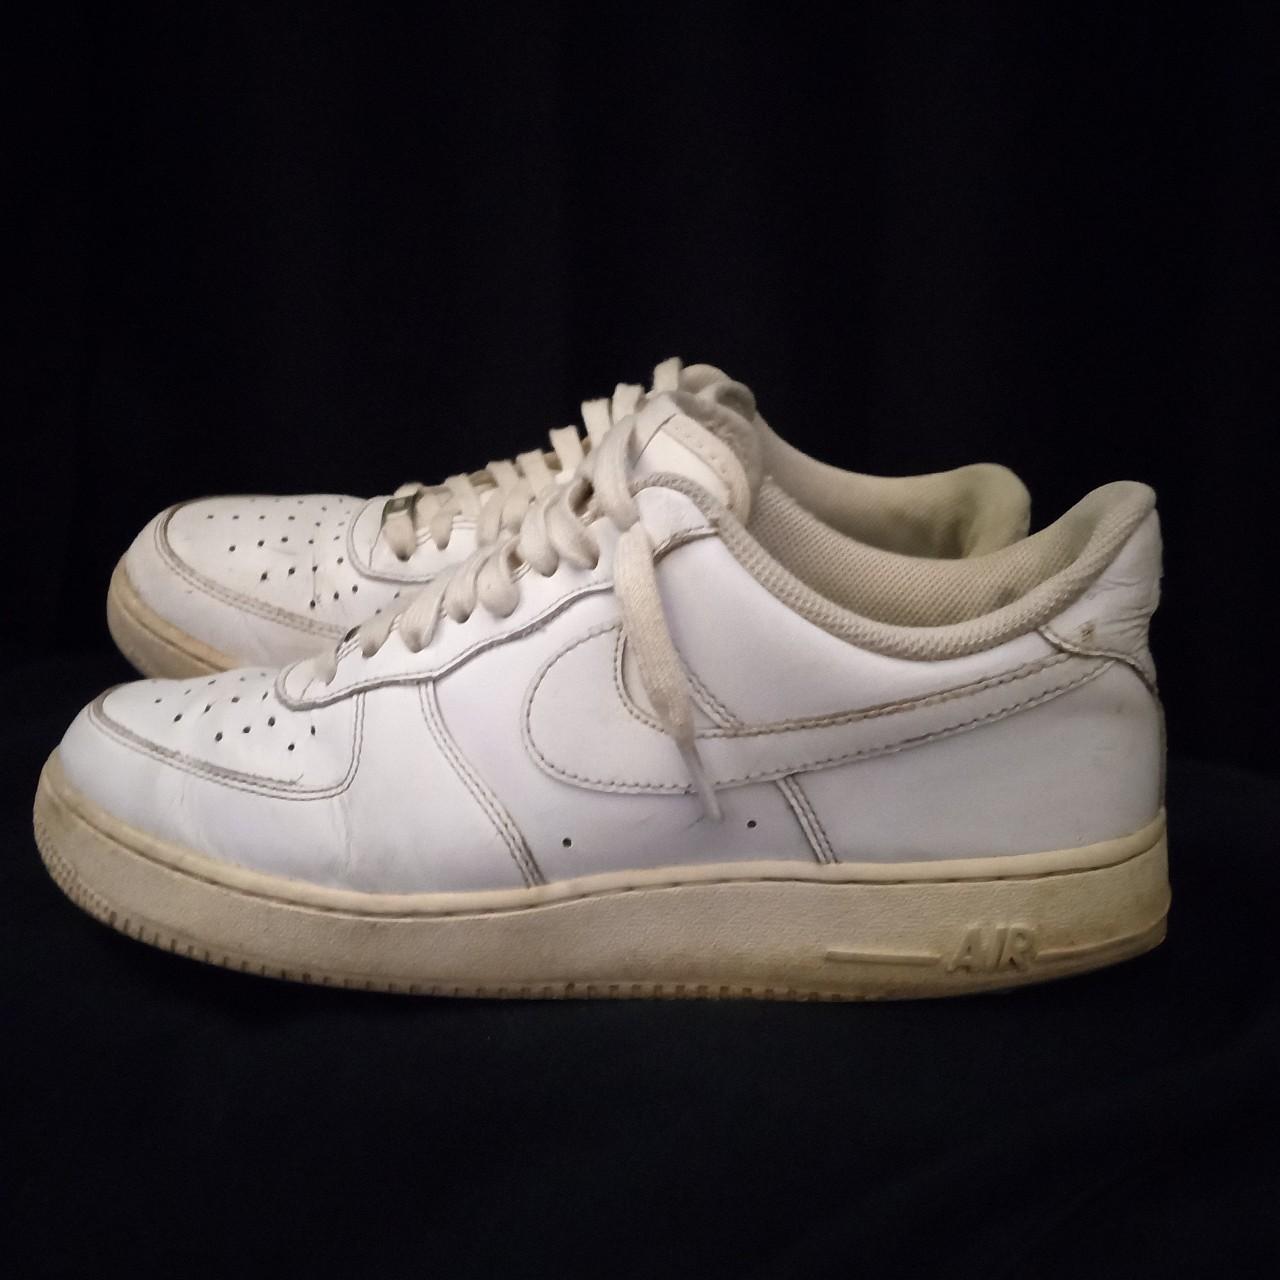 White air force 1 size 9.5 beat #shoes #nike... - Depop